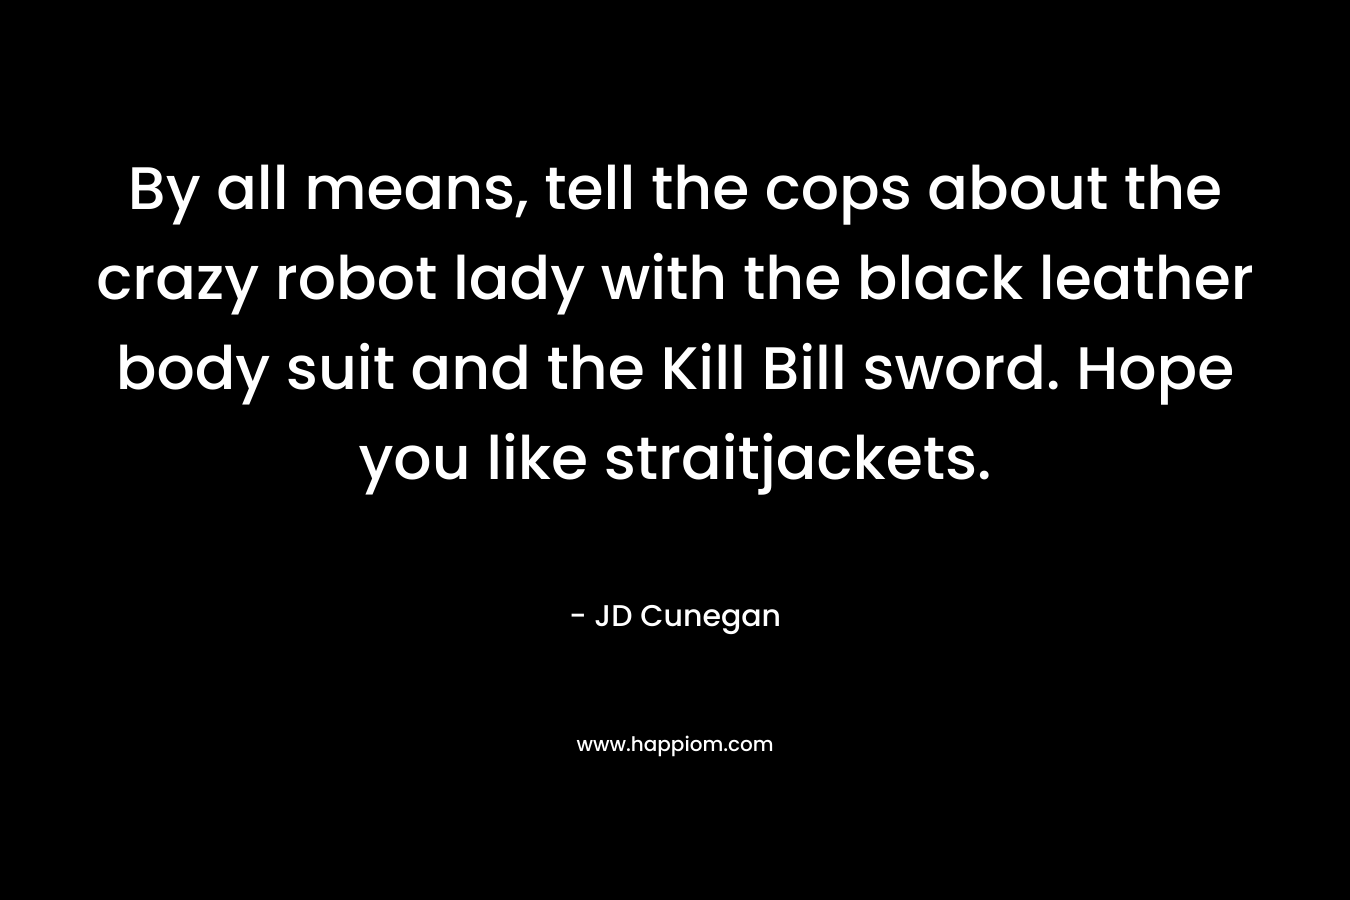 By all means, tell the cops about the crazy robot lady with the black leather body suit and the Kill Bill sword. Hope you like straitjackets.